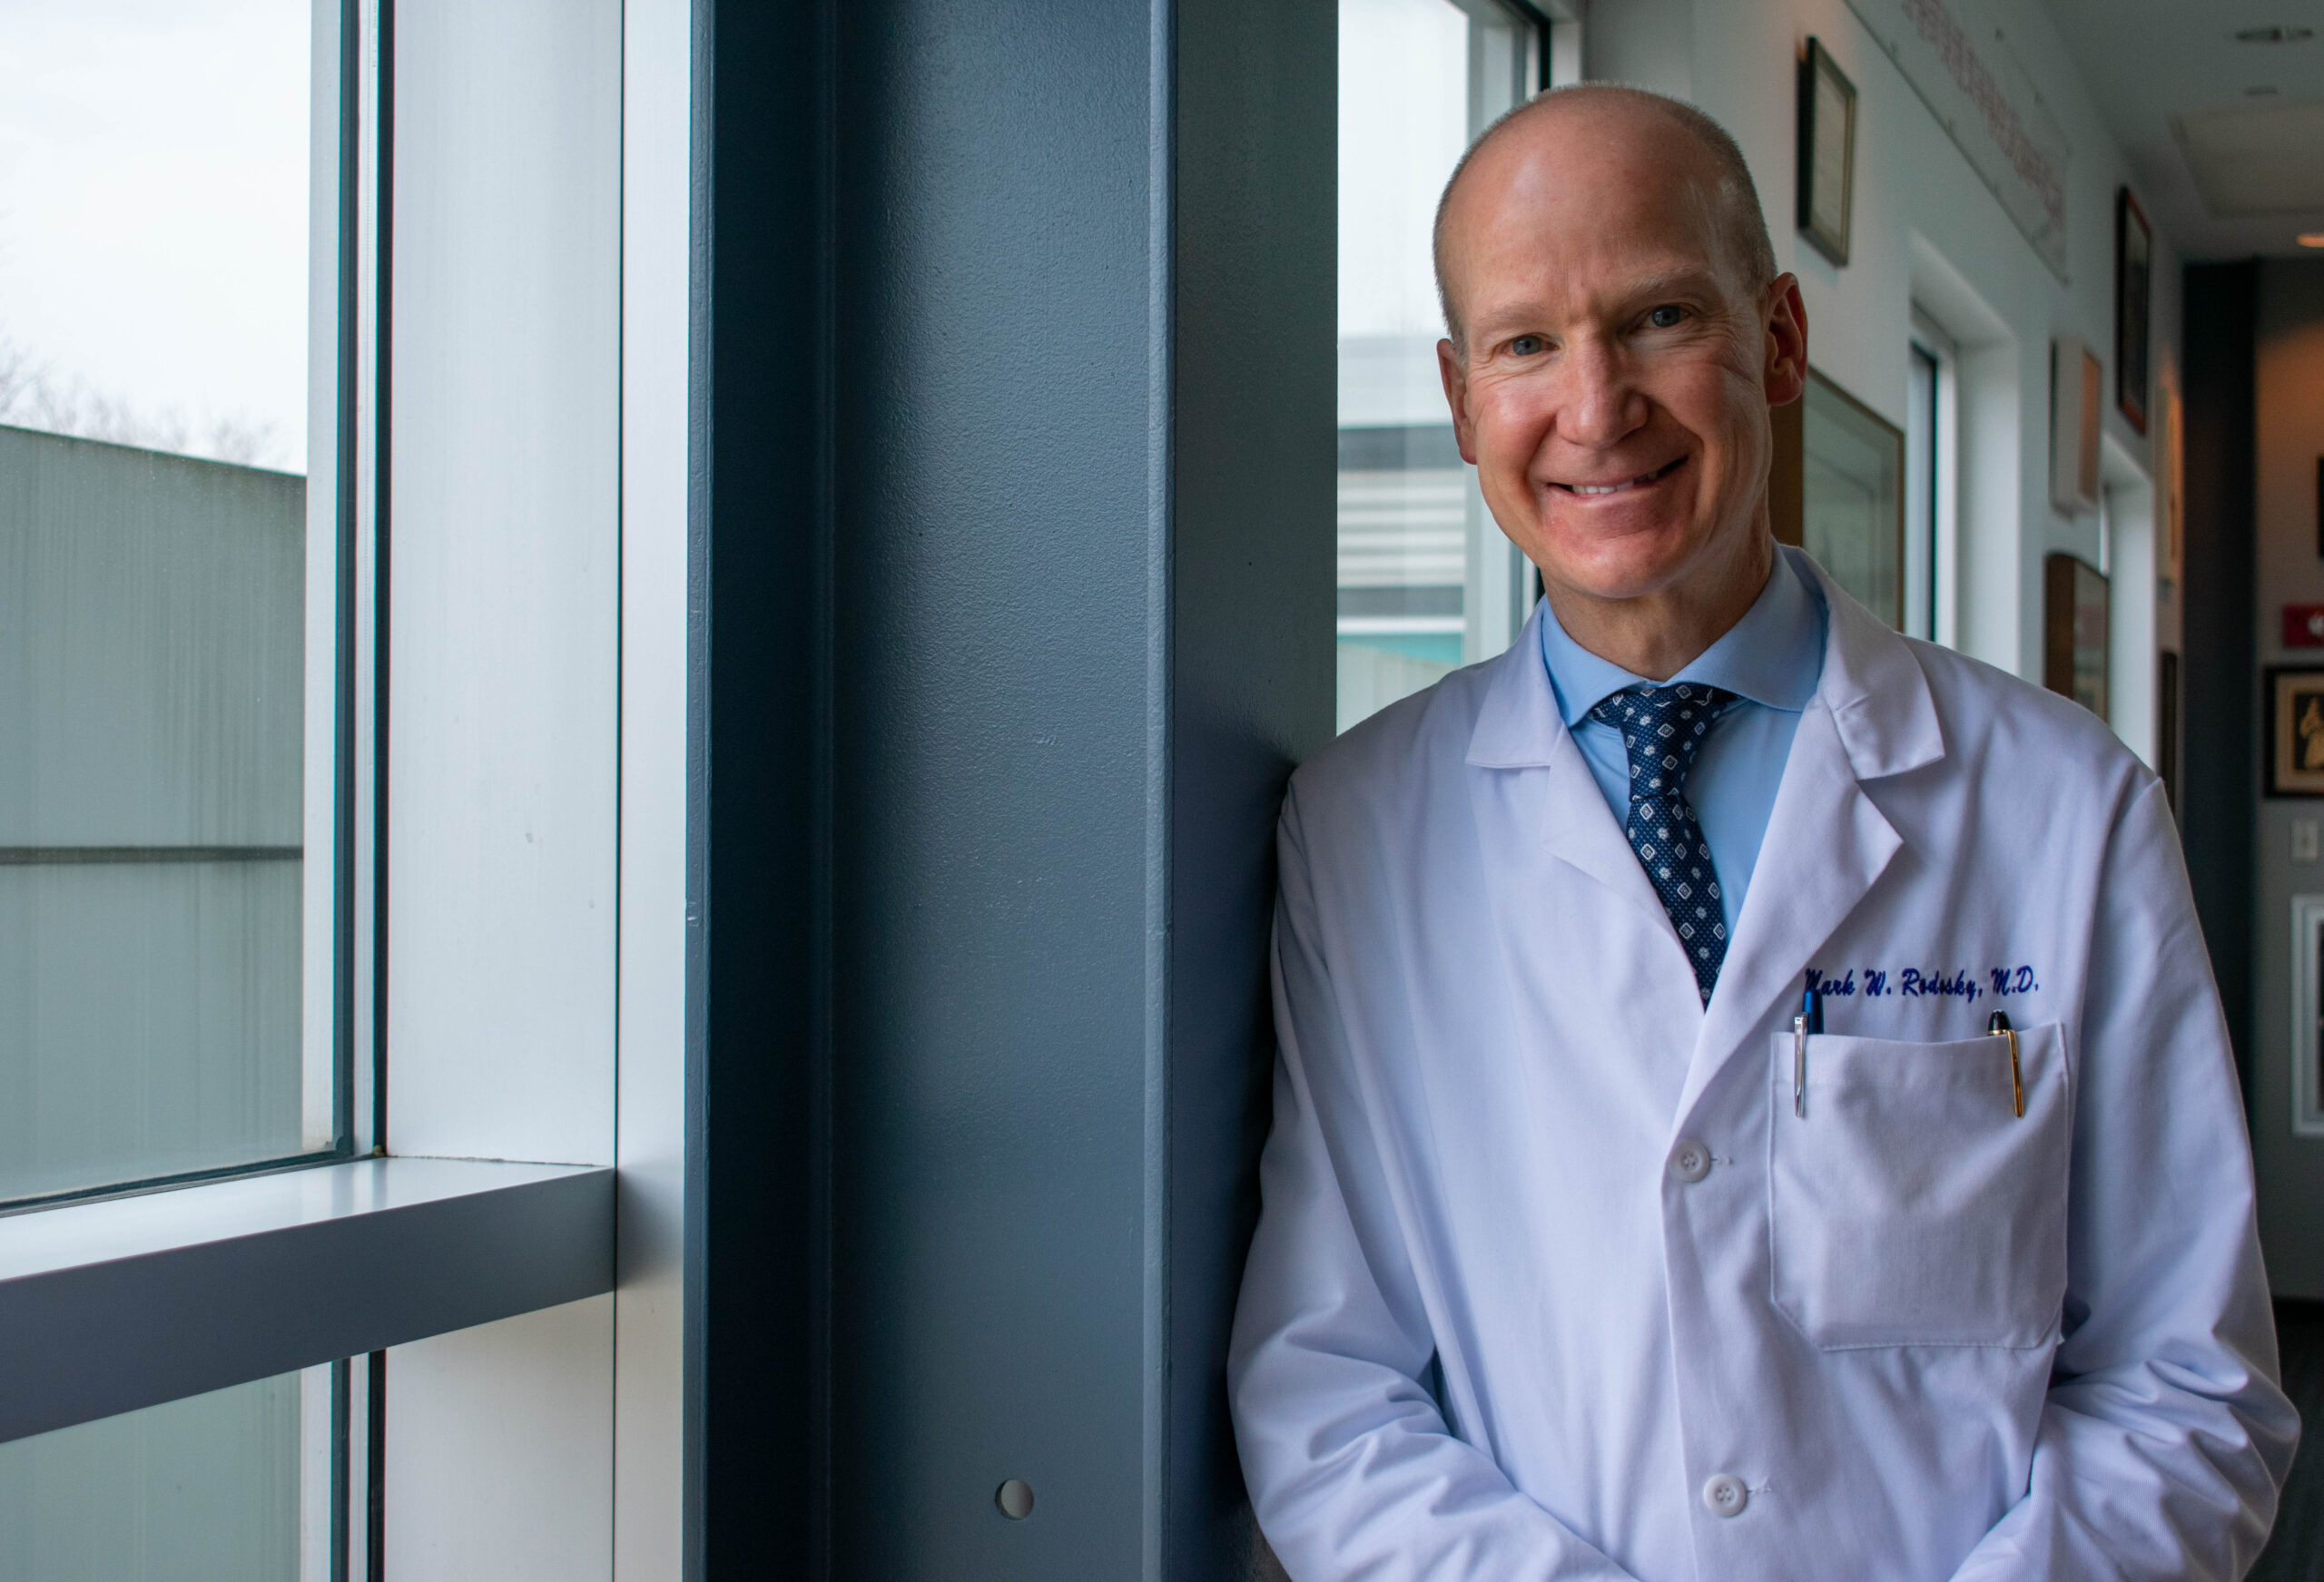 Meet The Researcher – Mark W. Rodosky, MD